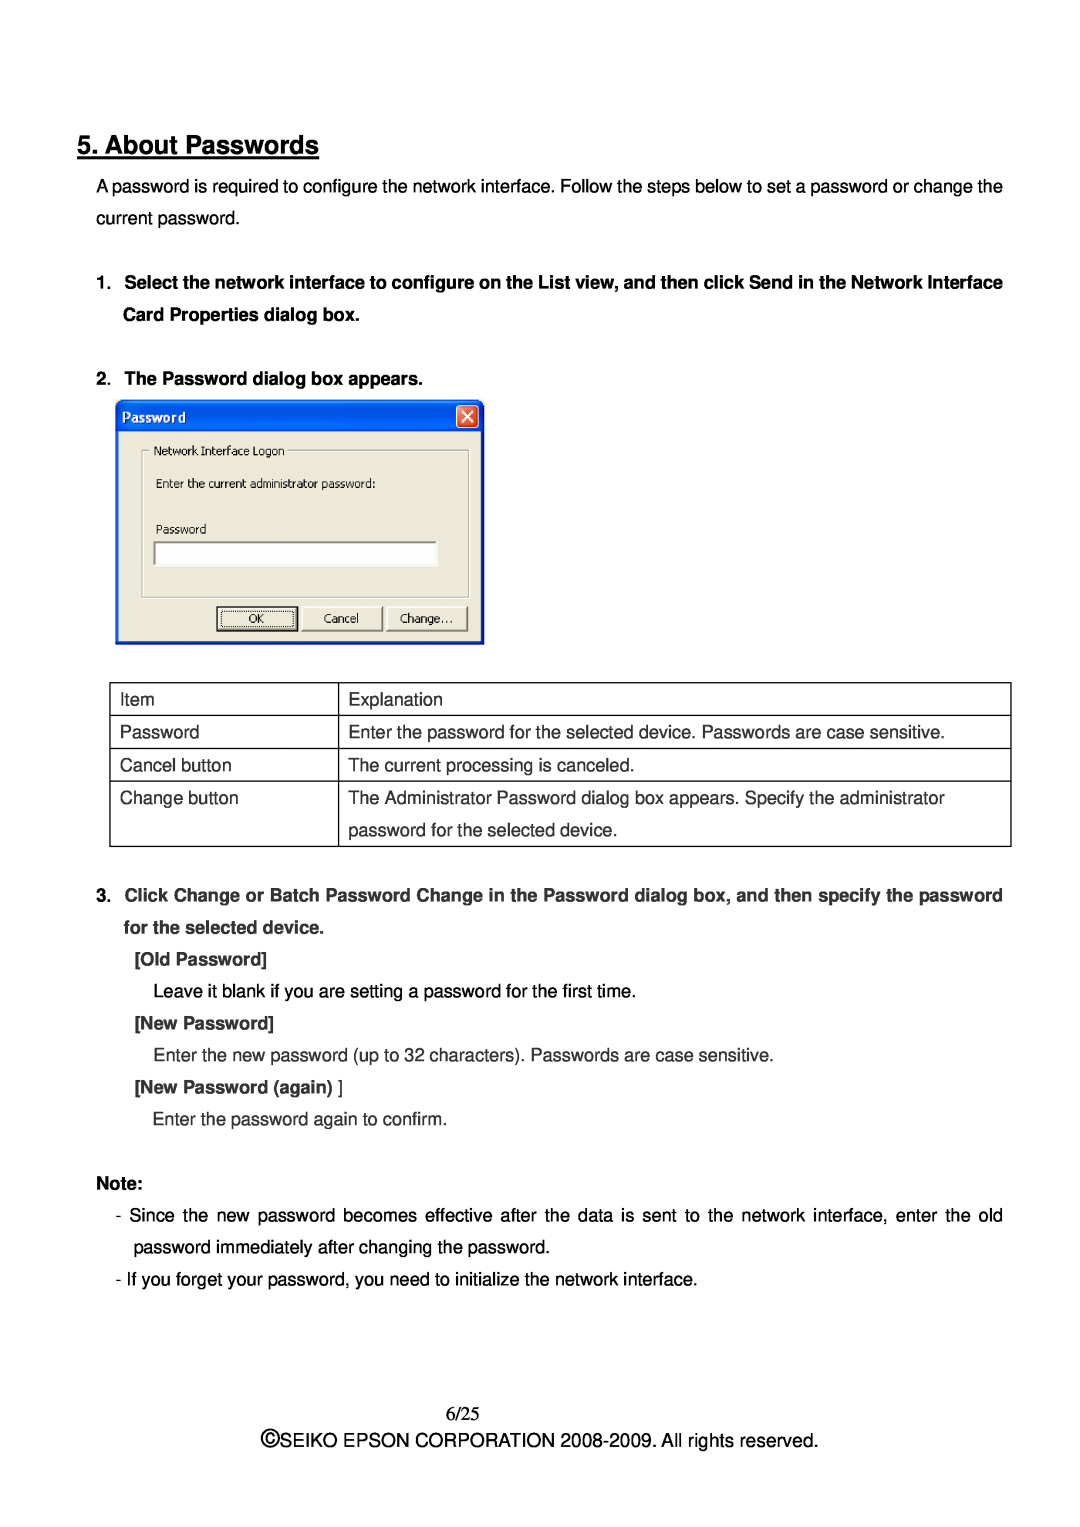 Epson M00001901 manual About Passwords, 6/25, 2．The Password dialog box appears 